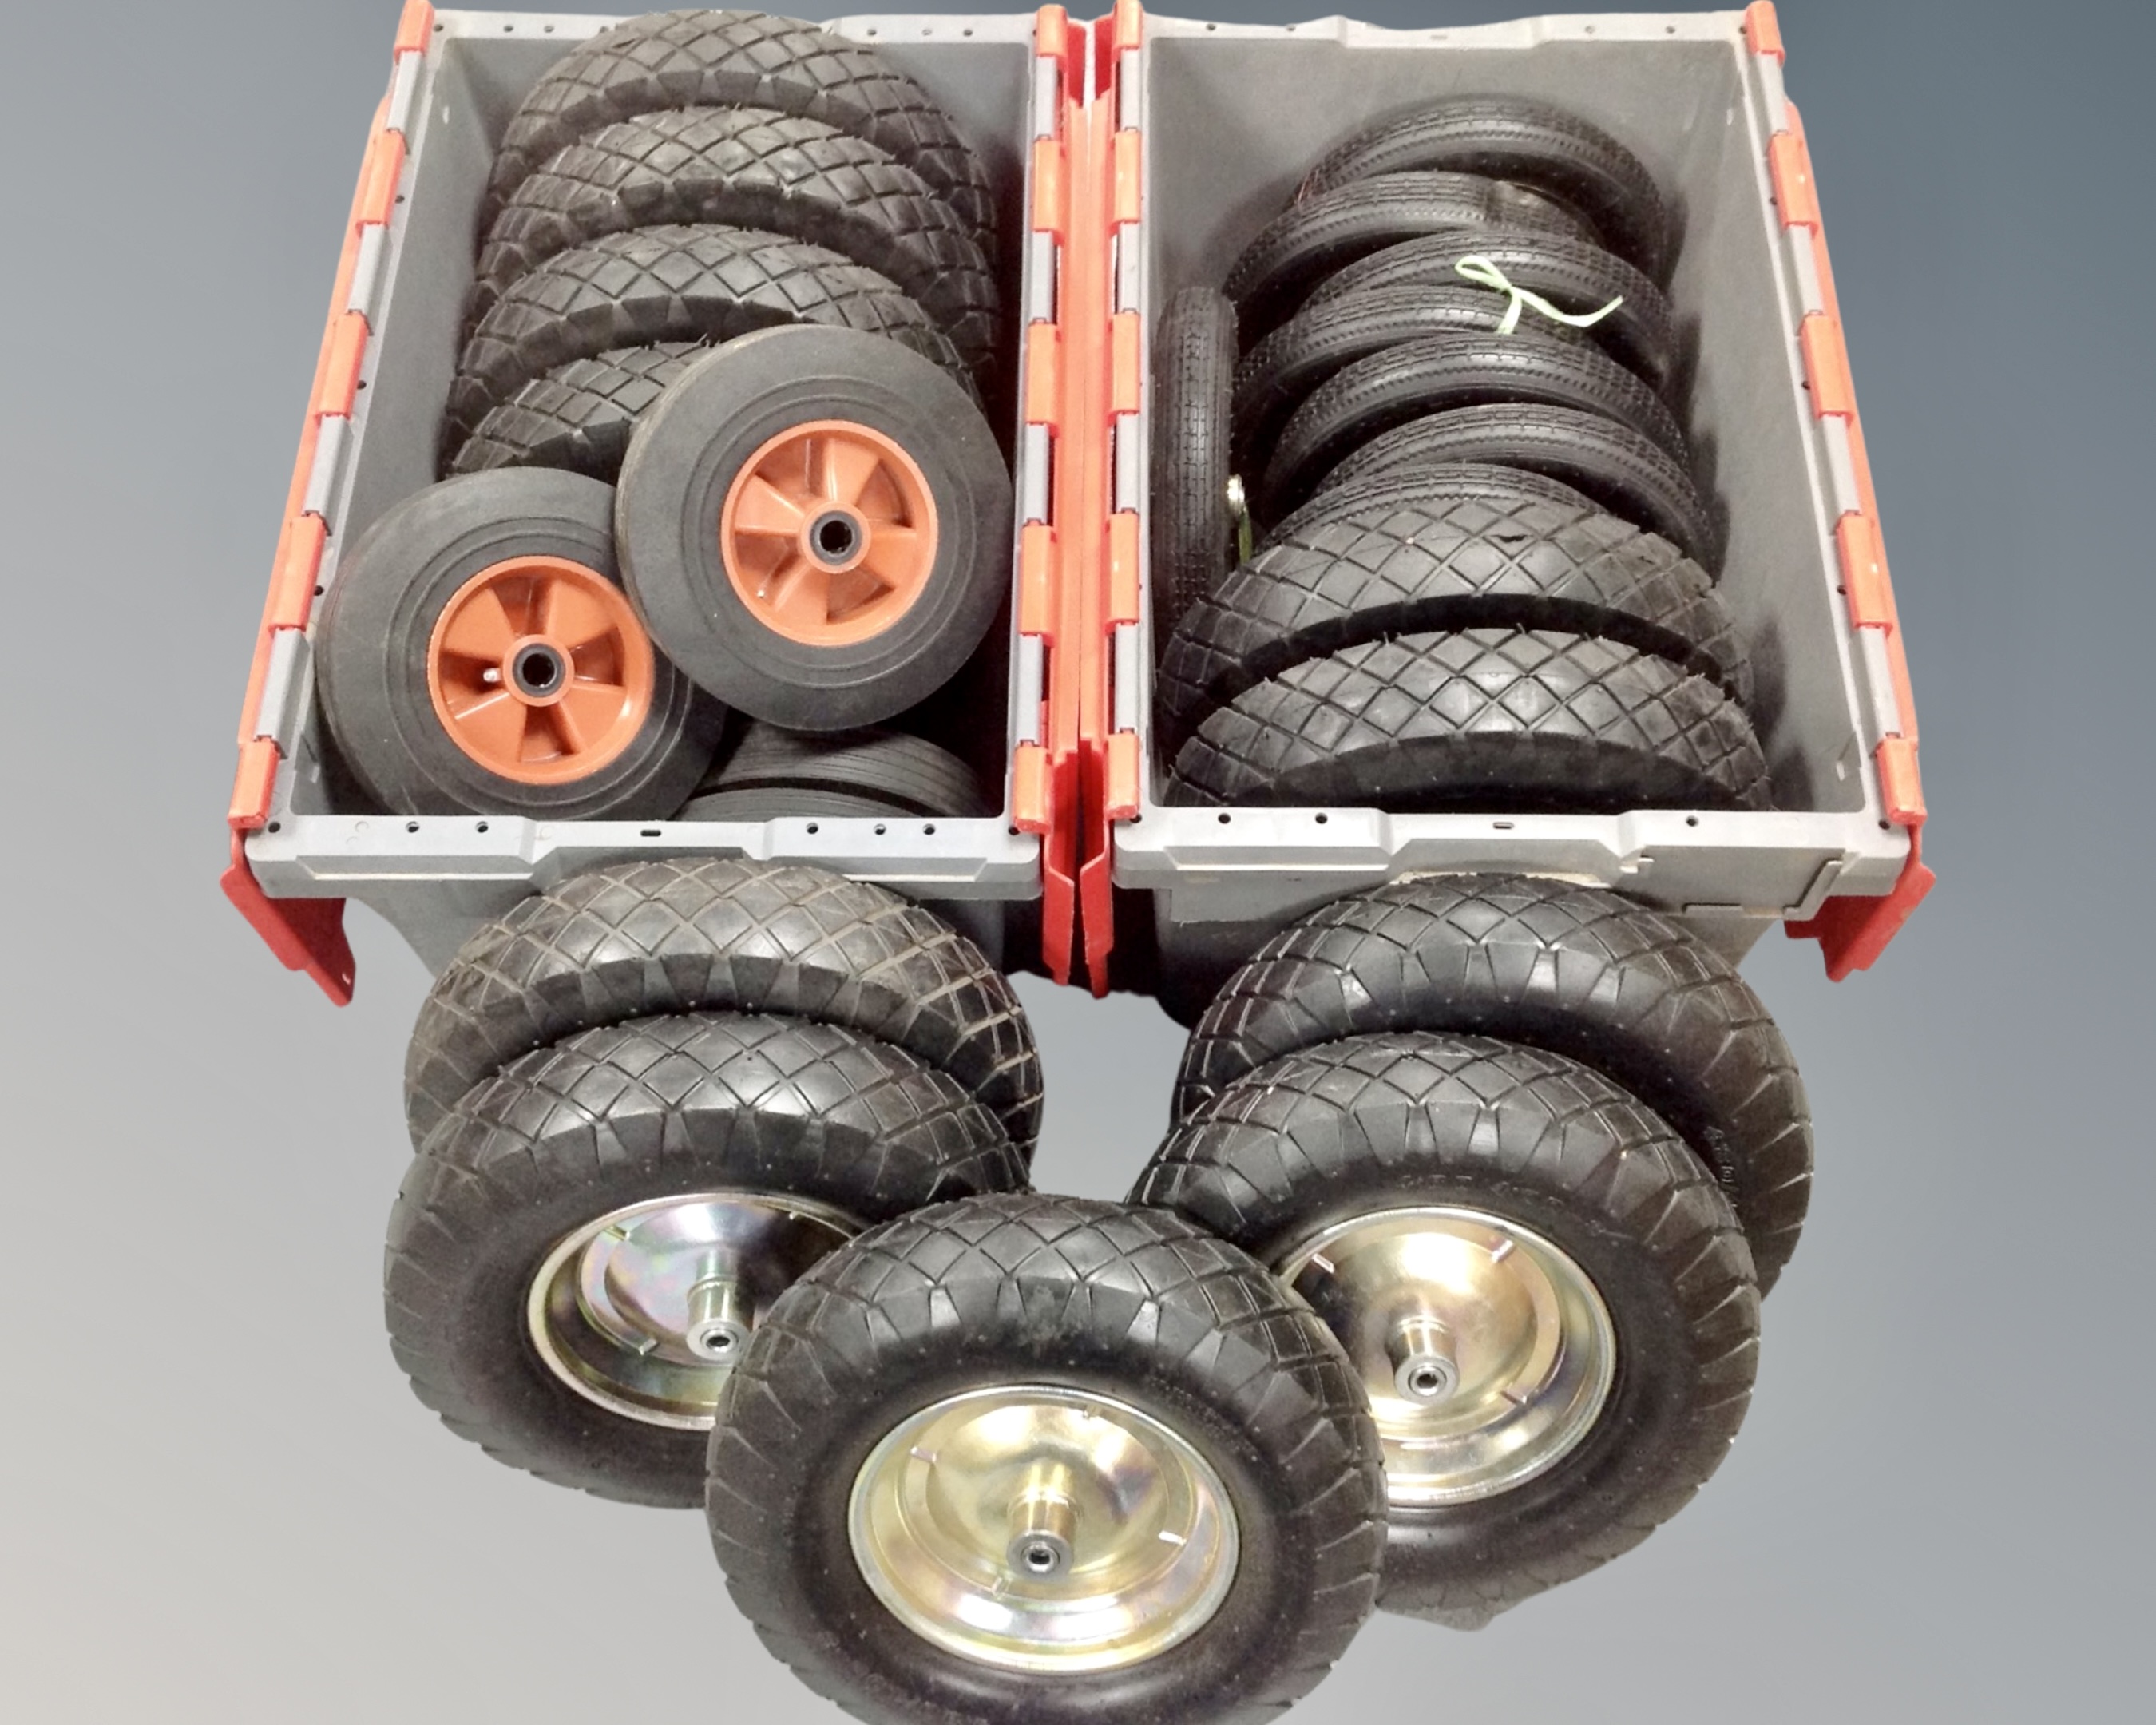 Two crates of sack barrow wheels